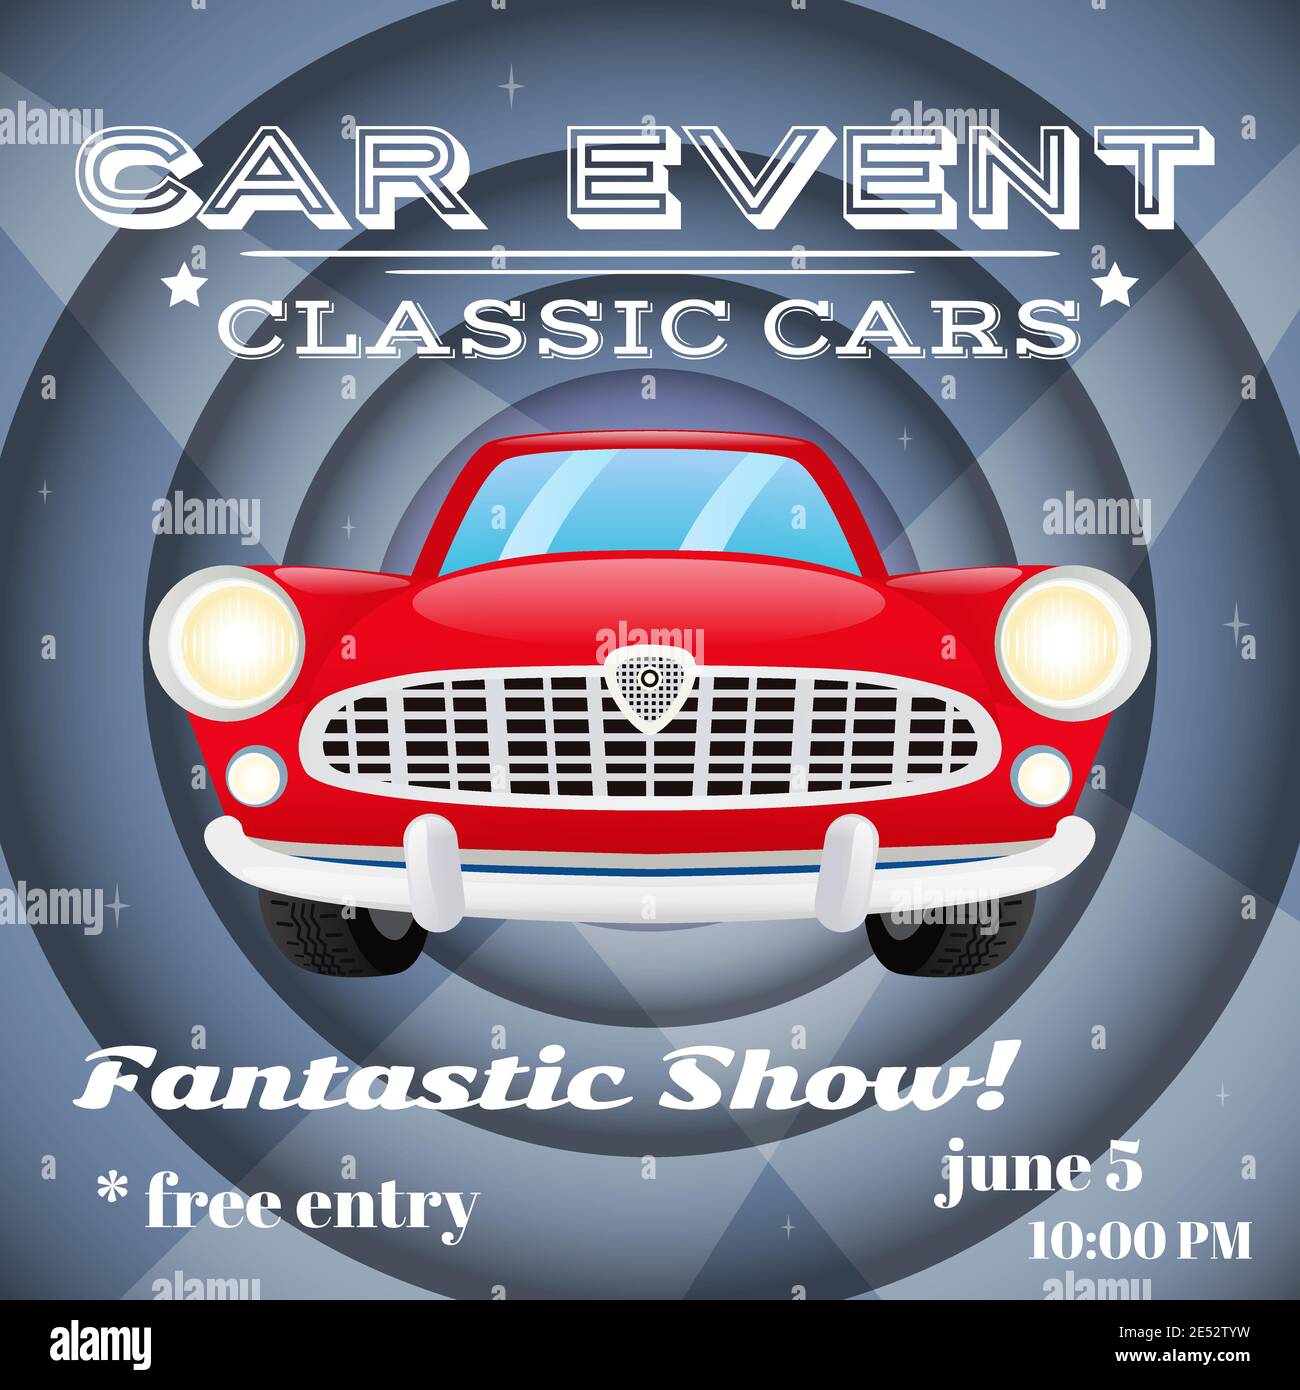 Retro classic cars show event auto advertising poster vector illustration Stock Vector